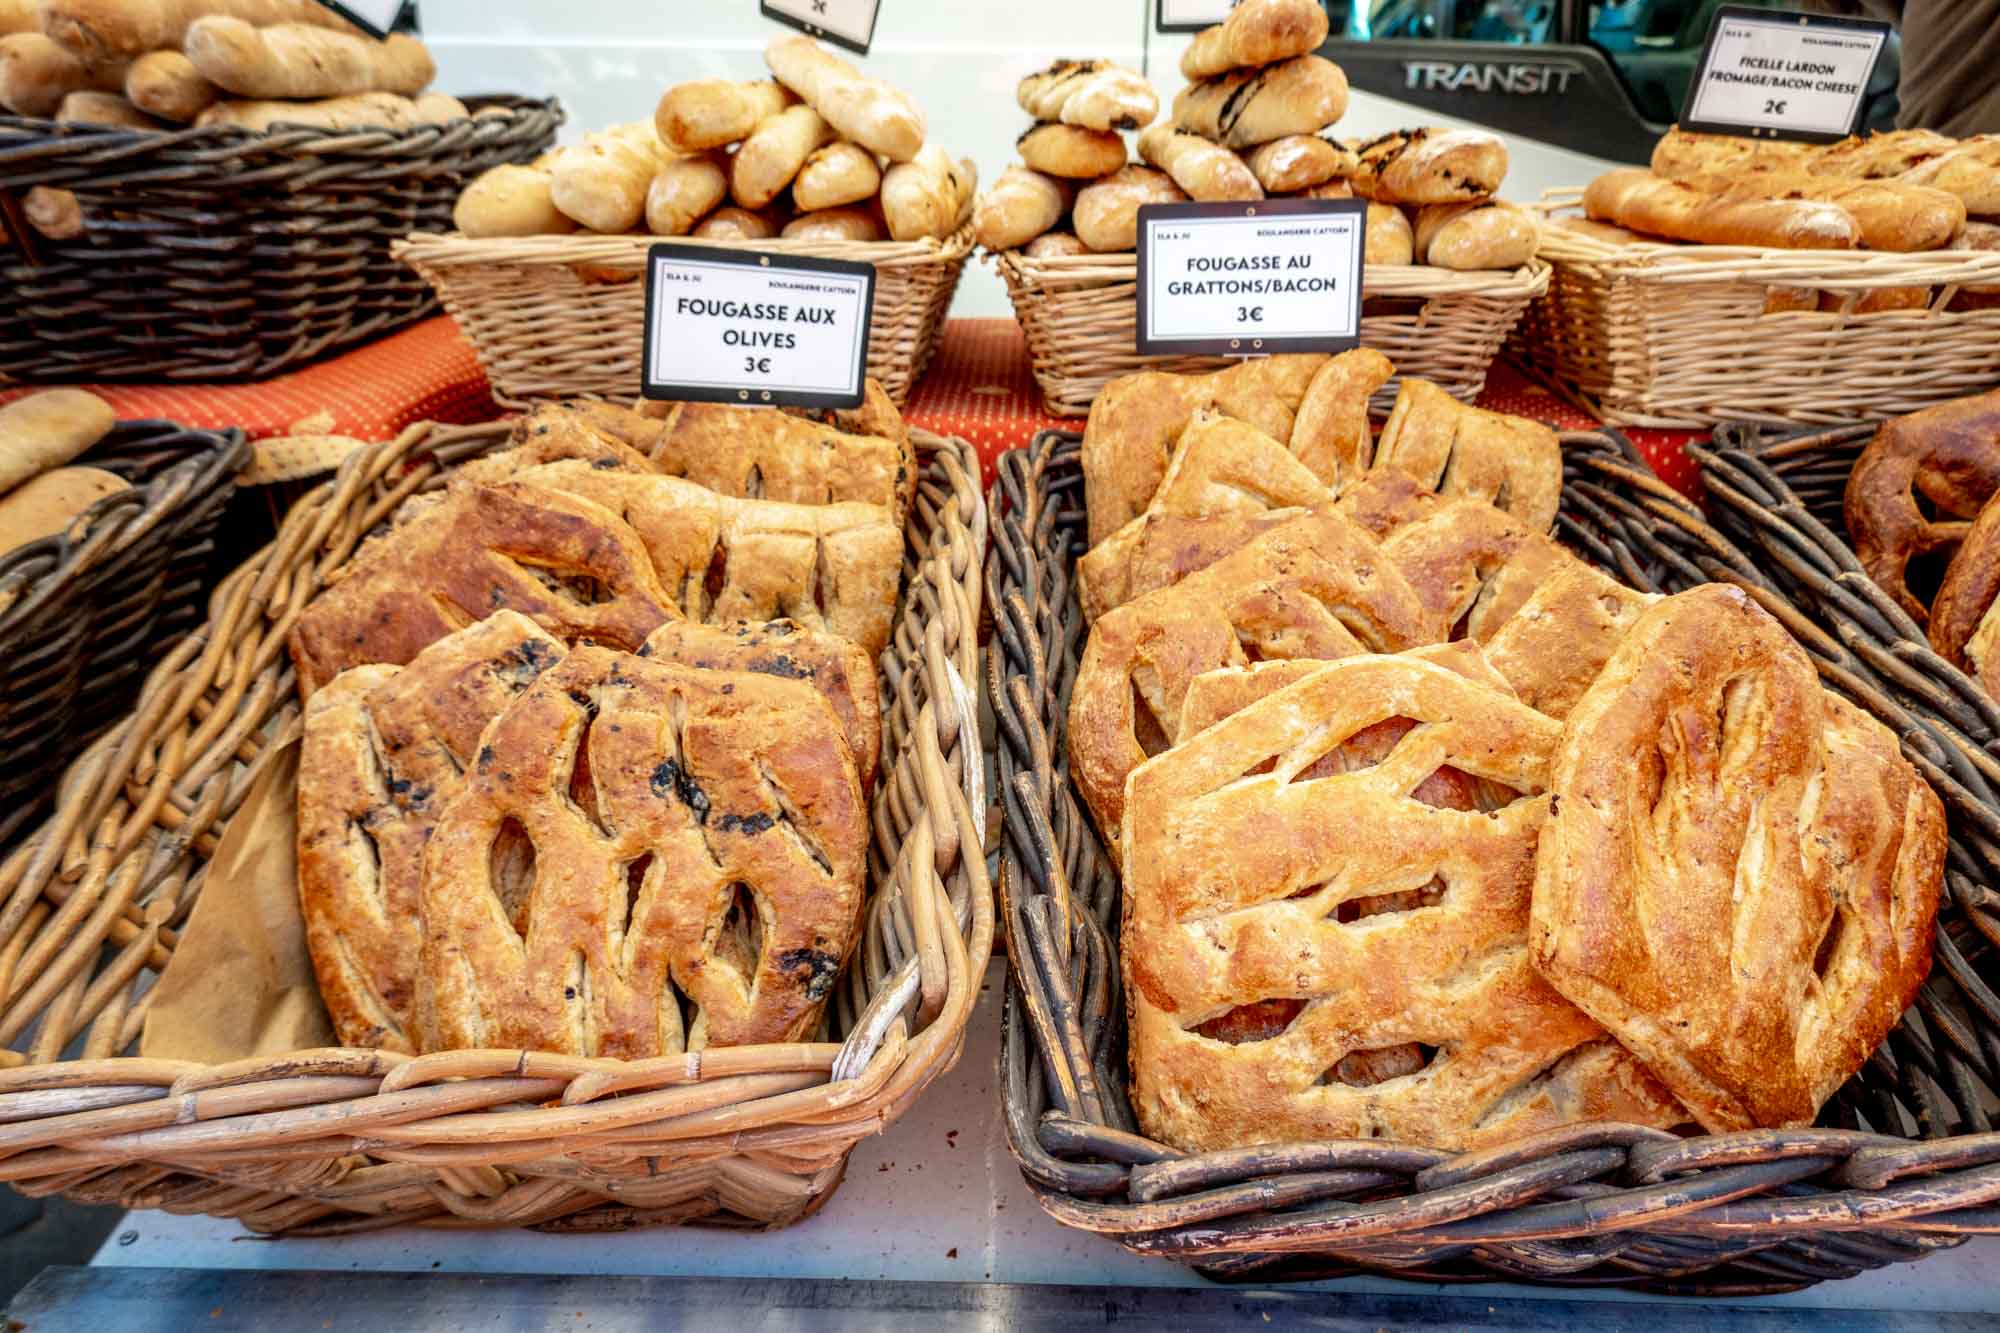 Fougasse bread for sale at a farmers market stall